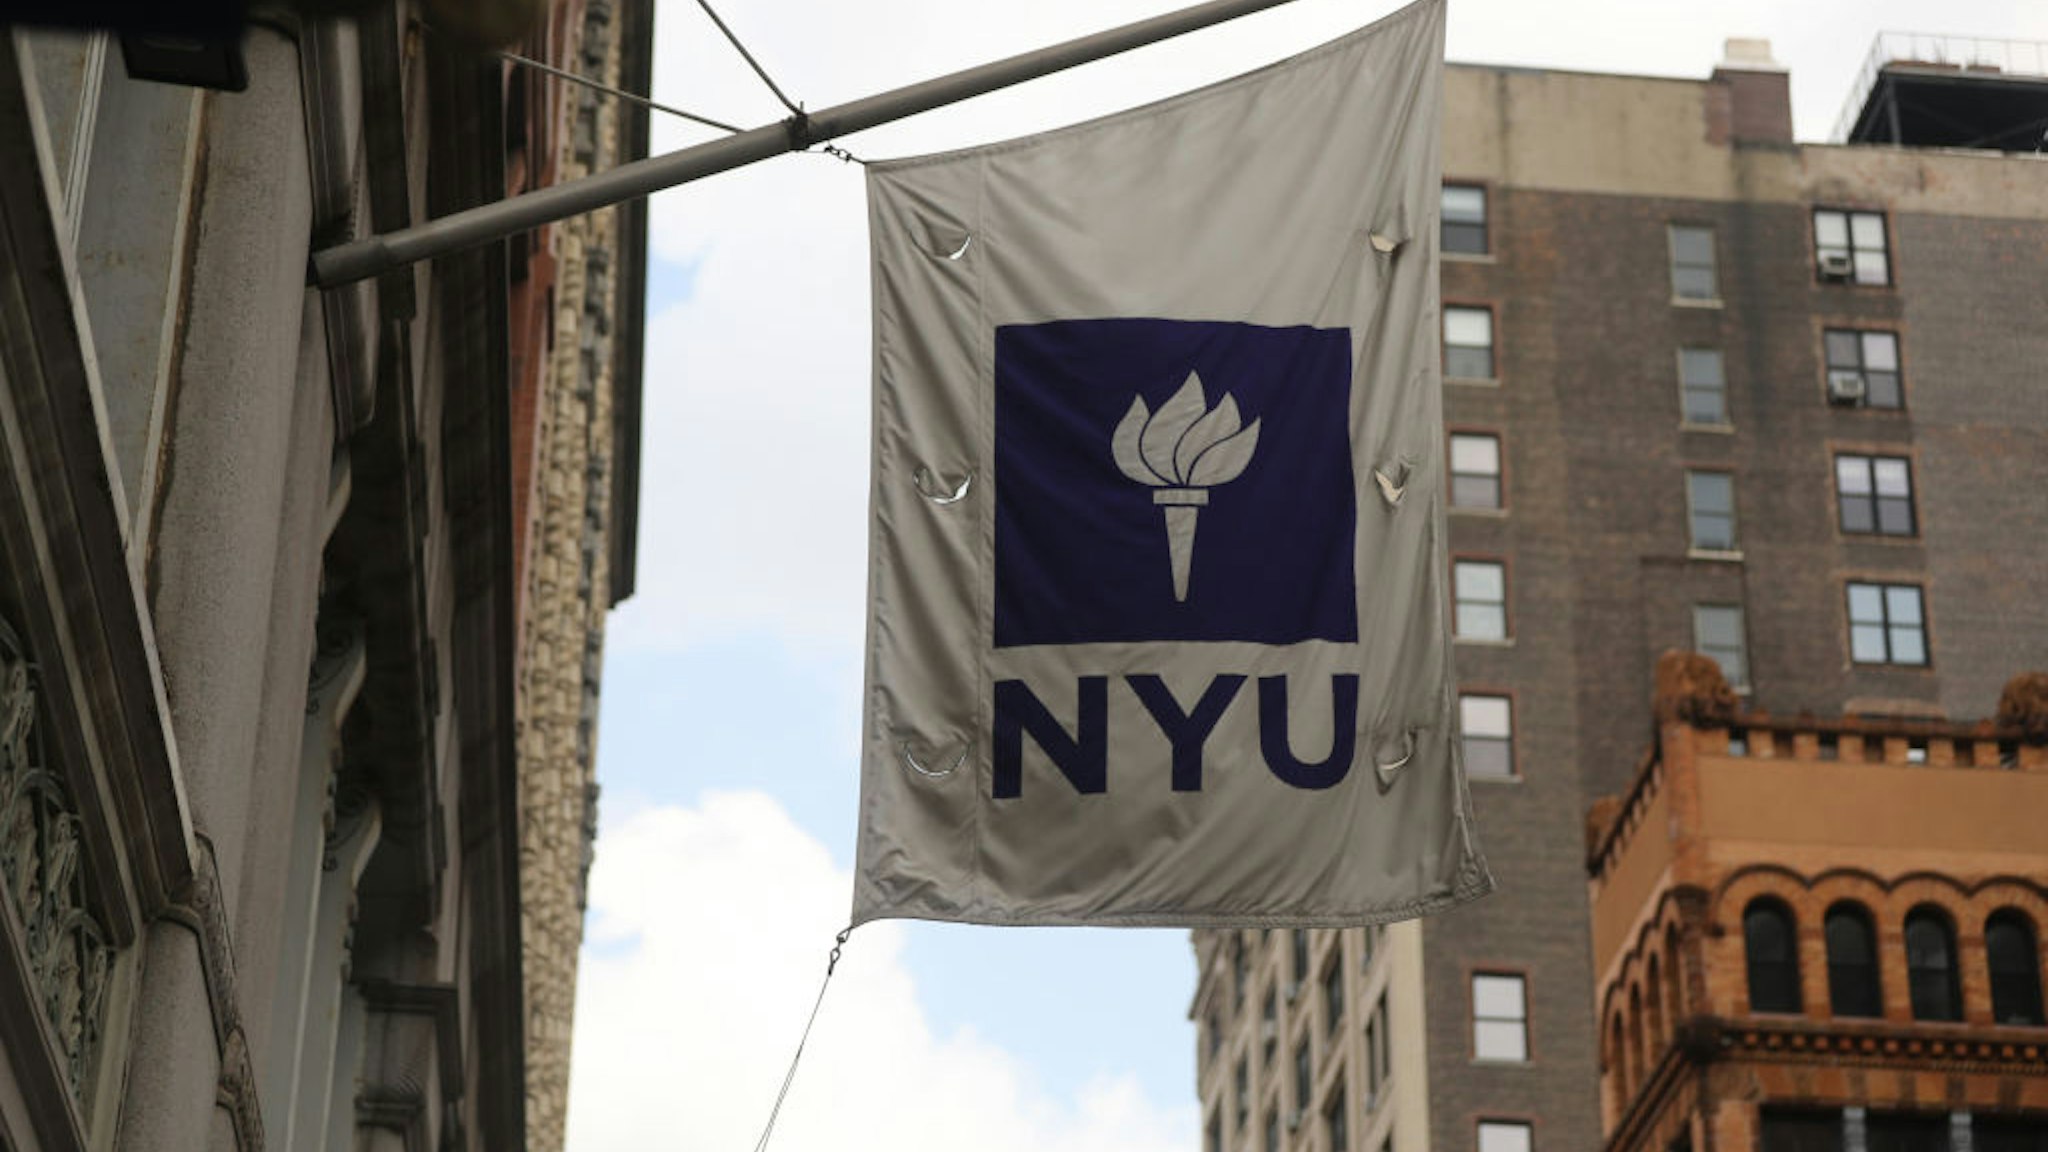 NEW YORK, NEW YORK - AUGUST 25: A New York University (NYU) flag flies outside a Covid-19 test tent outside of the NYU business school on August 25, 2020 in New York City. All students arriving back to the campus are required to get tested for the virus upon arrival and must be tested again seven to 10 days later. Classes are set to begin on September 2. (Photo by Spencer Platt/Getty Images)